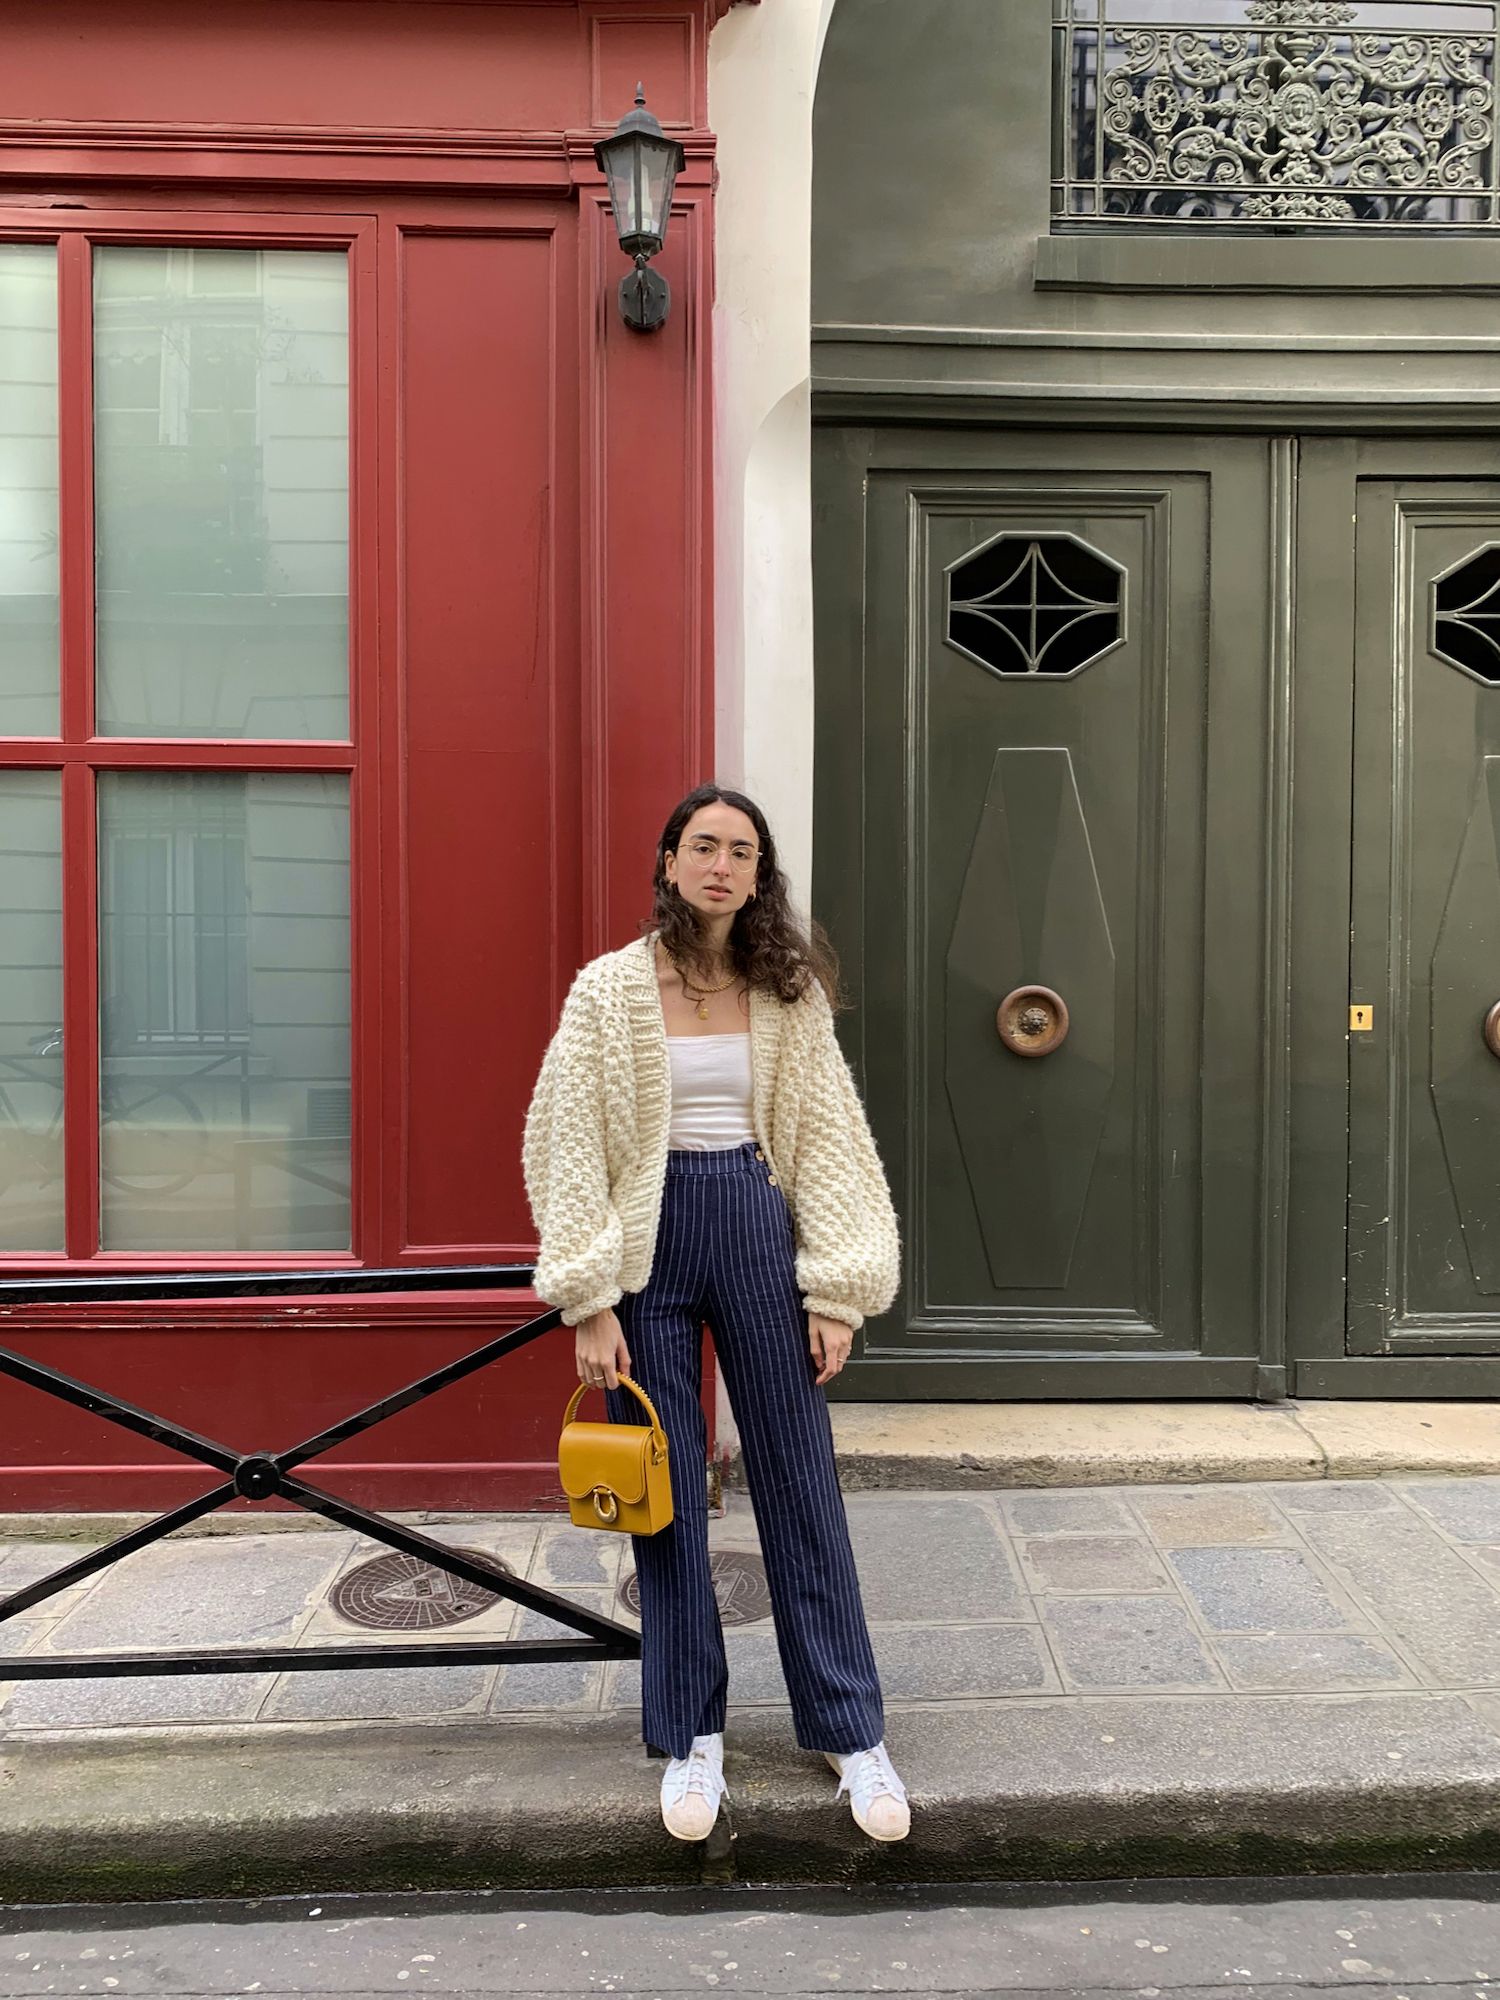 Pia, French girl style in Paris